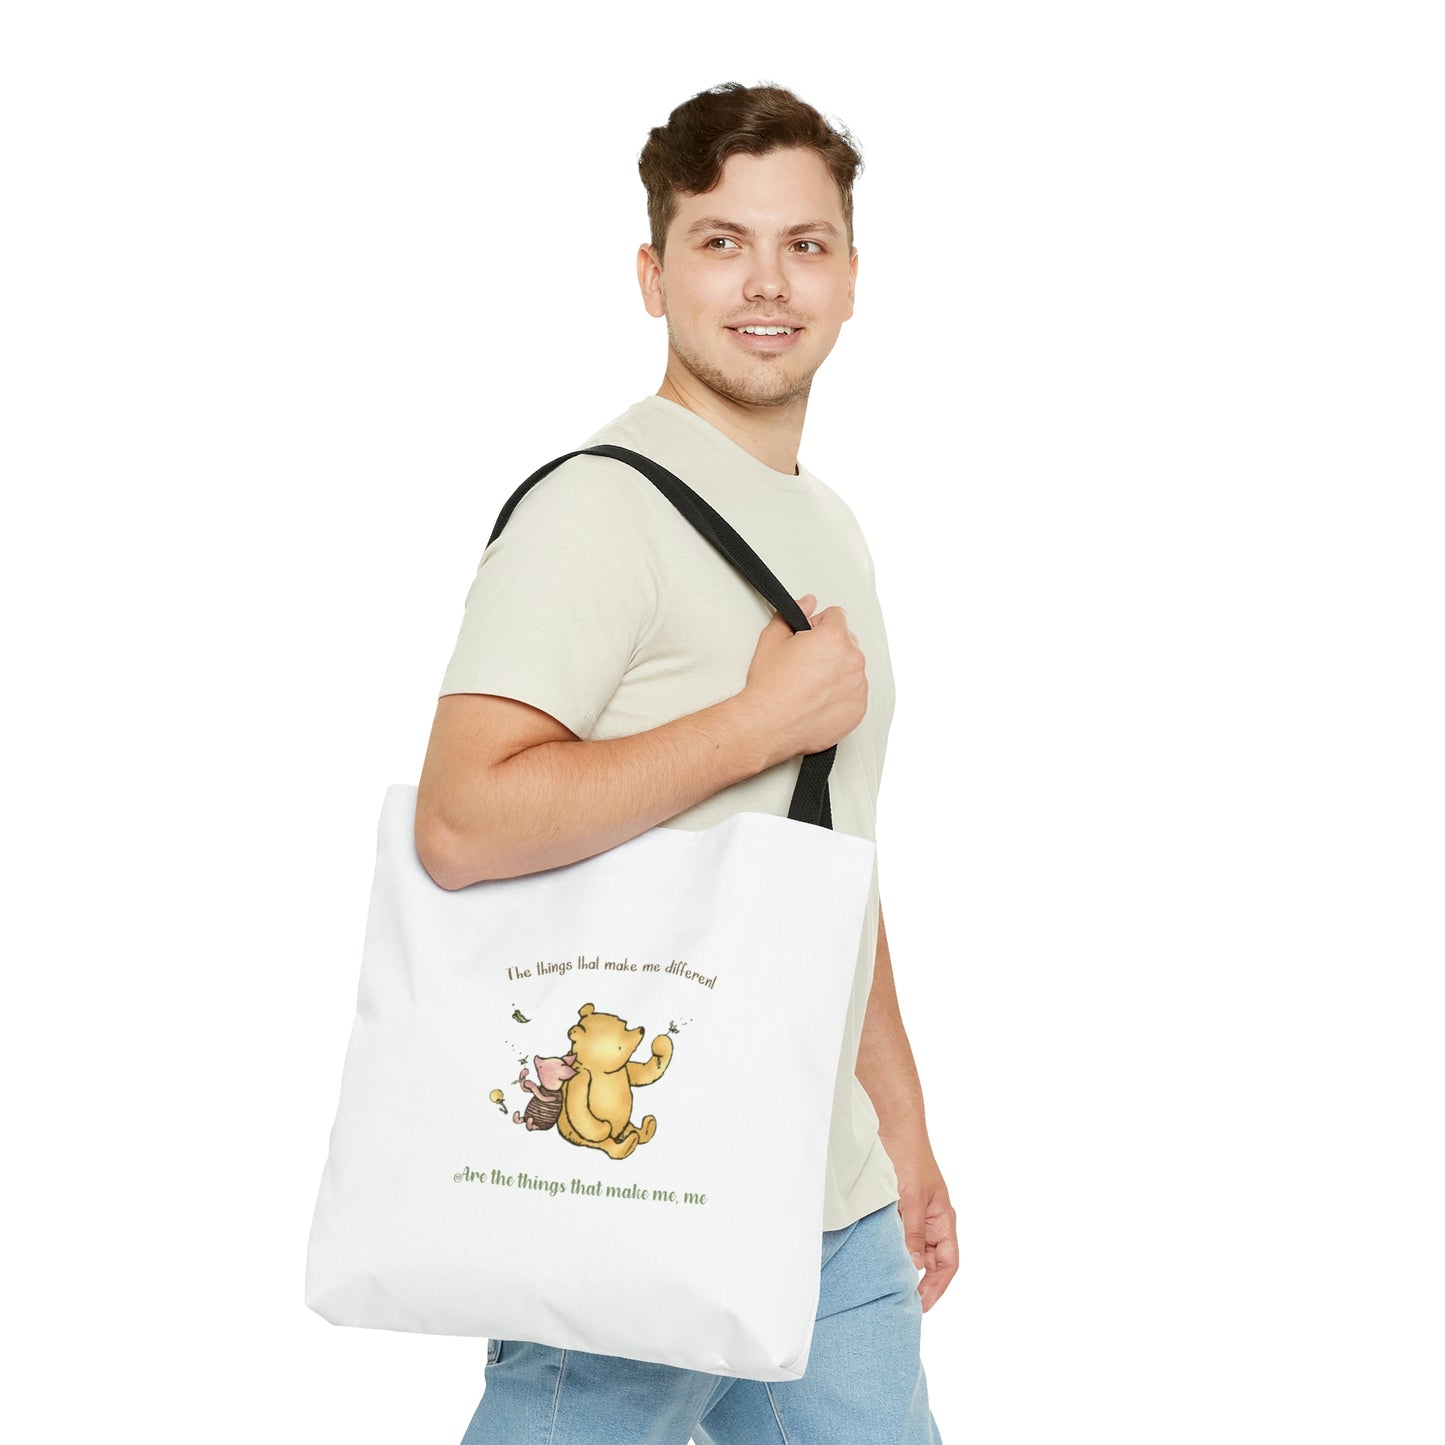 Winnie and Piglet Shopping Bag